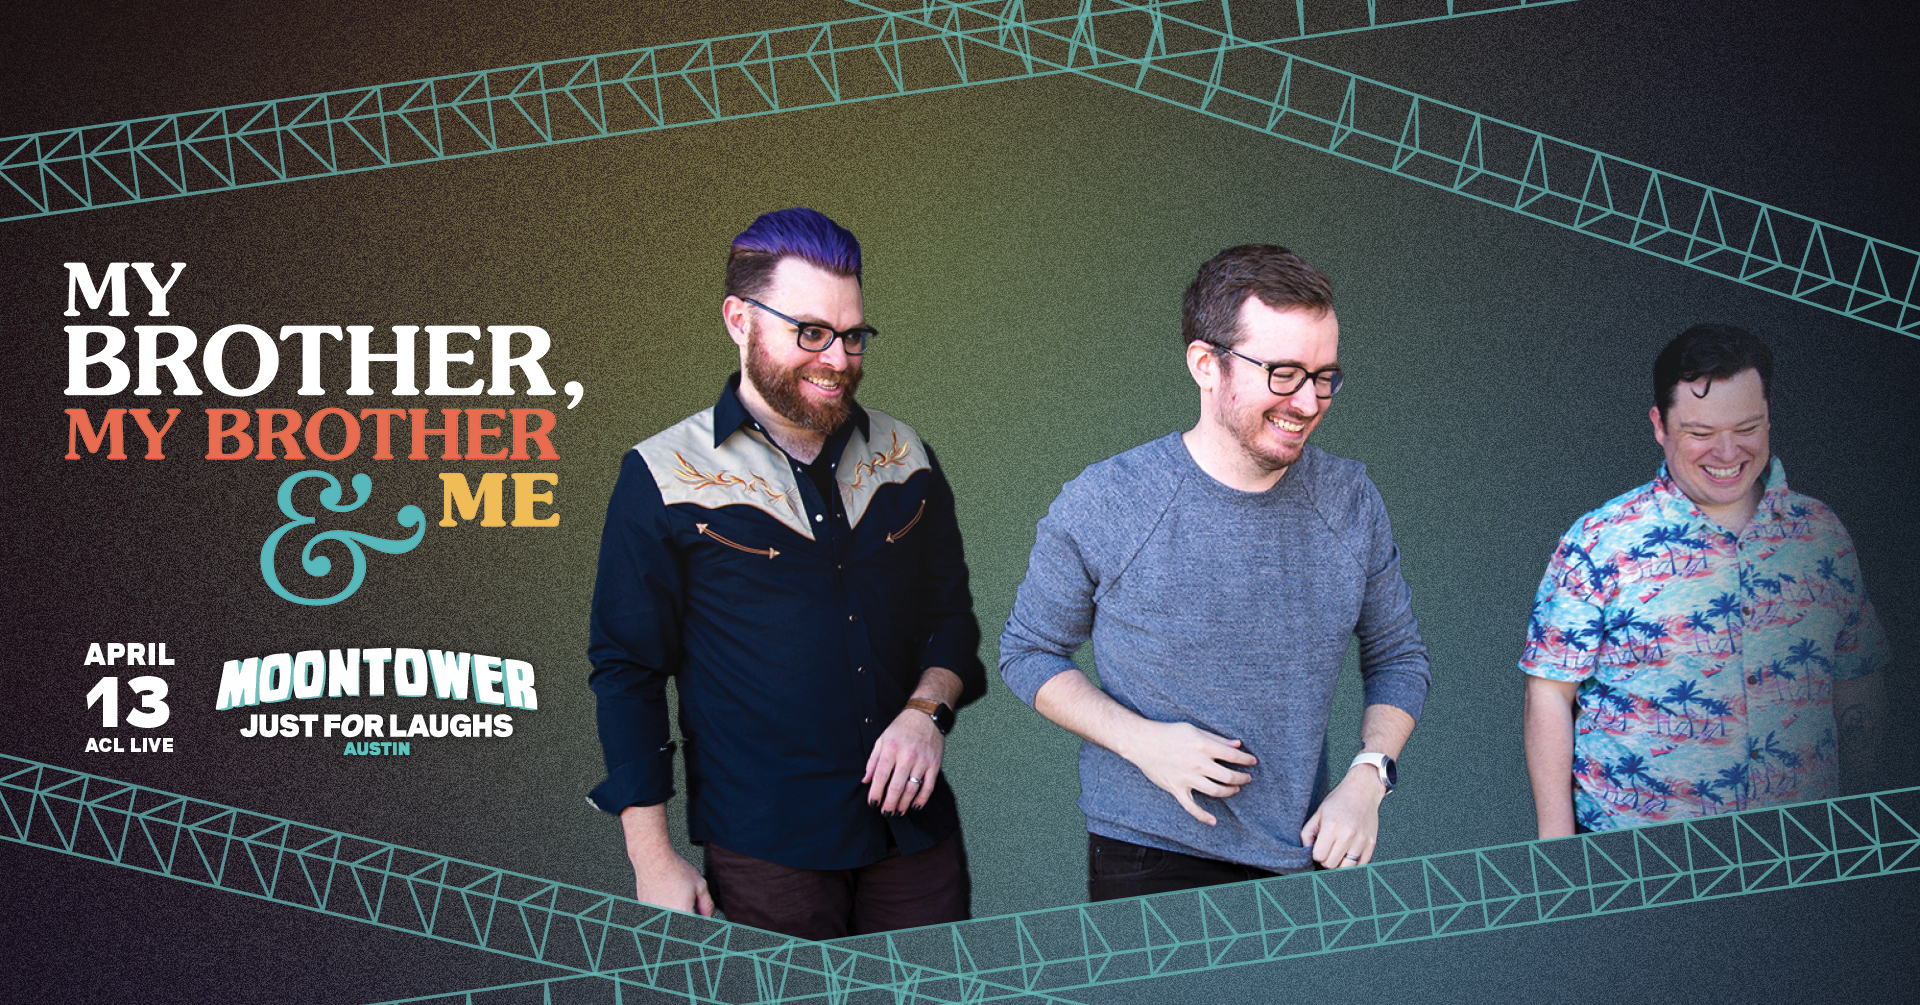 A photograph of the McElroy brothers is superimposed on an ombre background. Travis is on the left, Griffin in the middle, and Justin on the right. To the left, text reads “My Brother, My Brother and Me April 17th ACL Live Moontower Just for Laughs Austin”. Intersecting aqua geometric lines frame the image on the top and bottom.